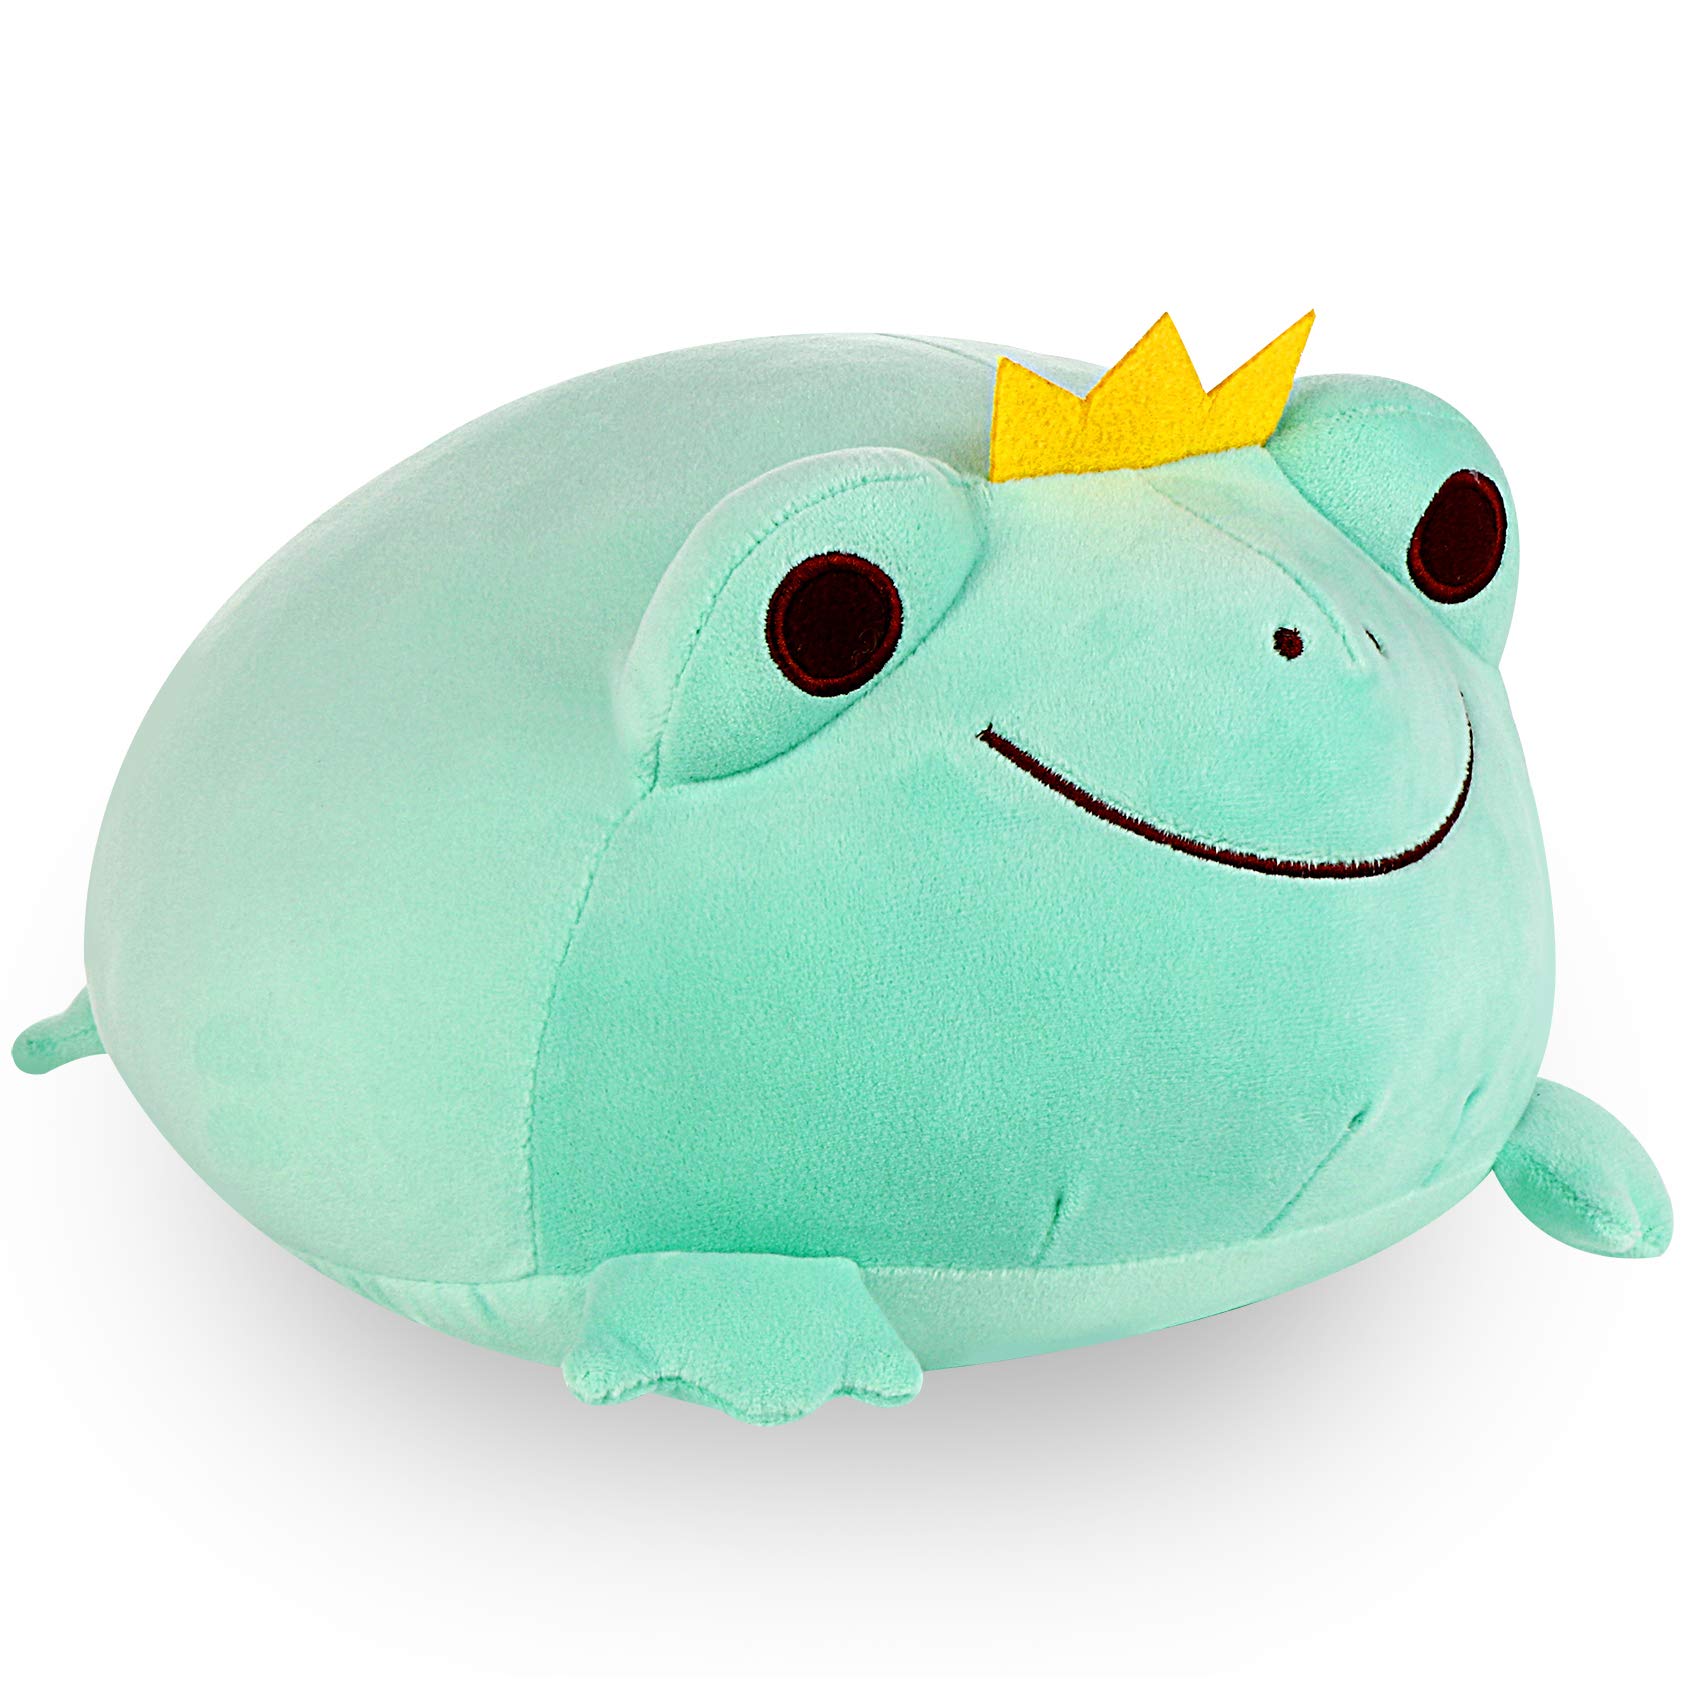 Skindy Soft and Cute Frog Doll Pillow - Green Plushie Companion